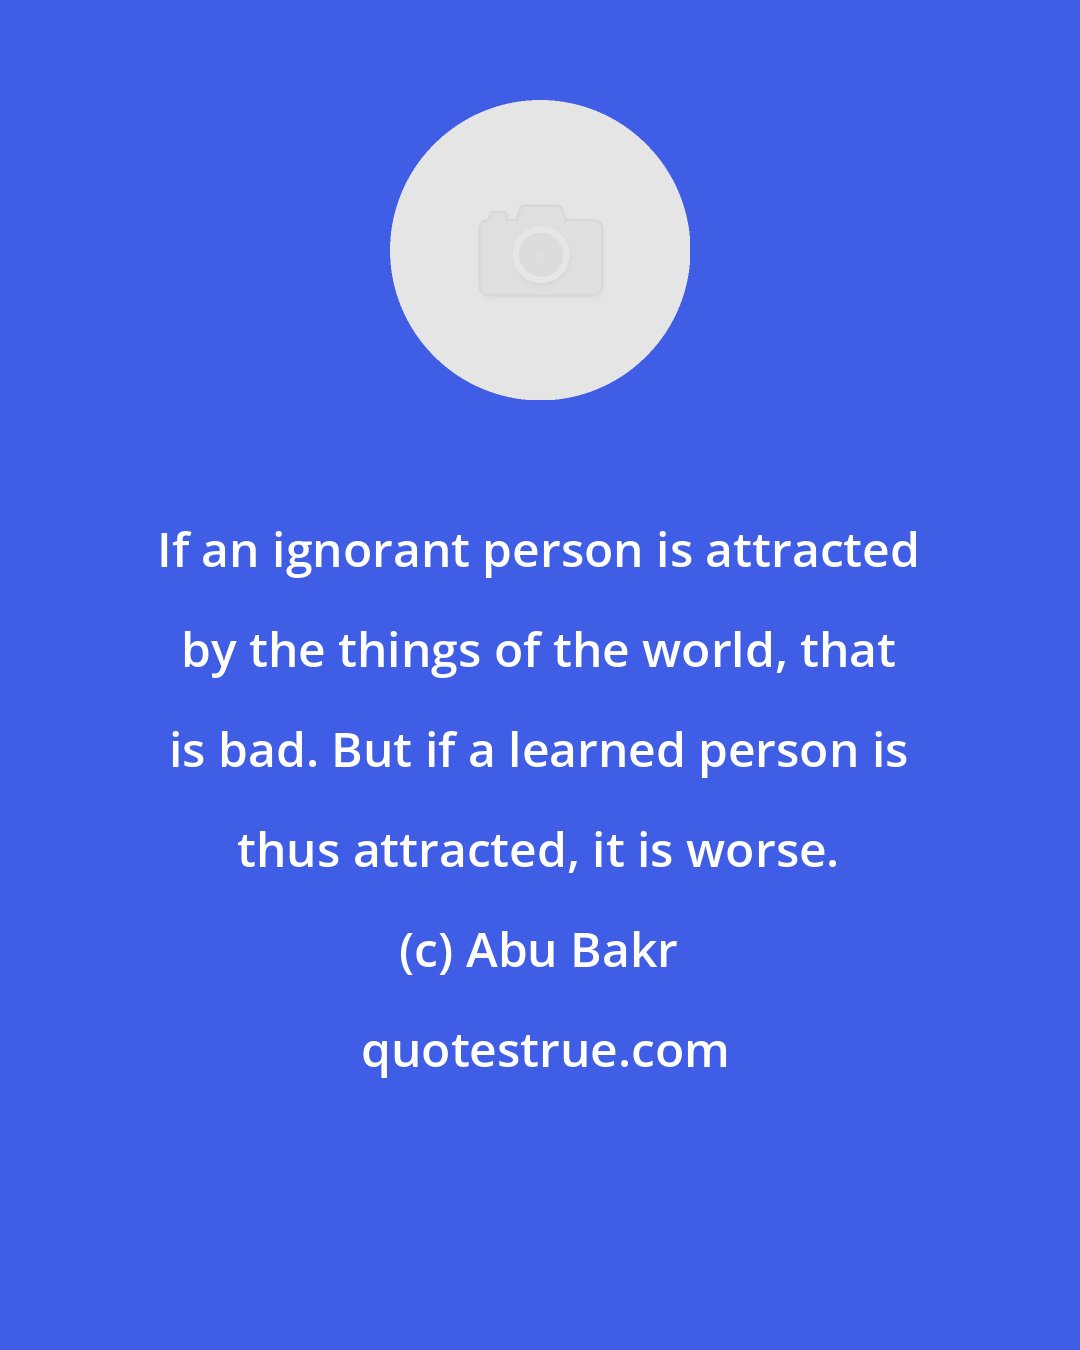 Abu Bakr: If an ignorant person is attracted by the things of the world, that is bad. But if a learned person is thus attracted, it is worse.